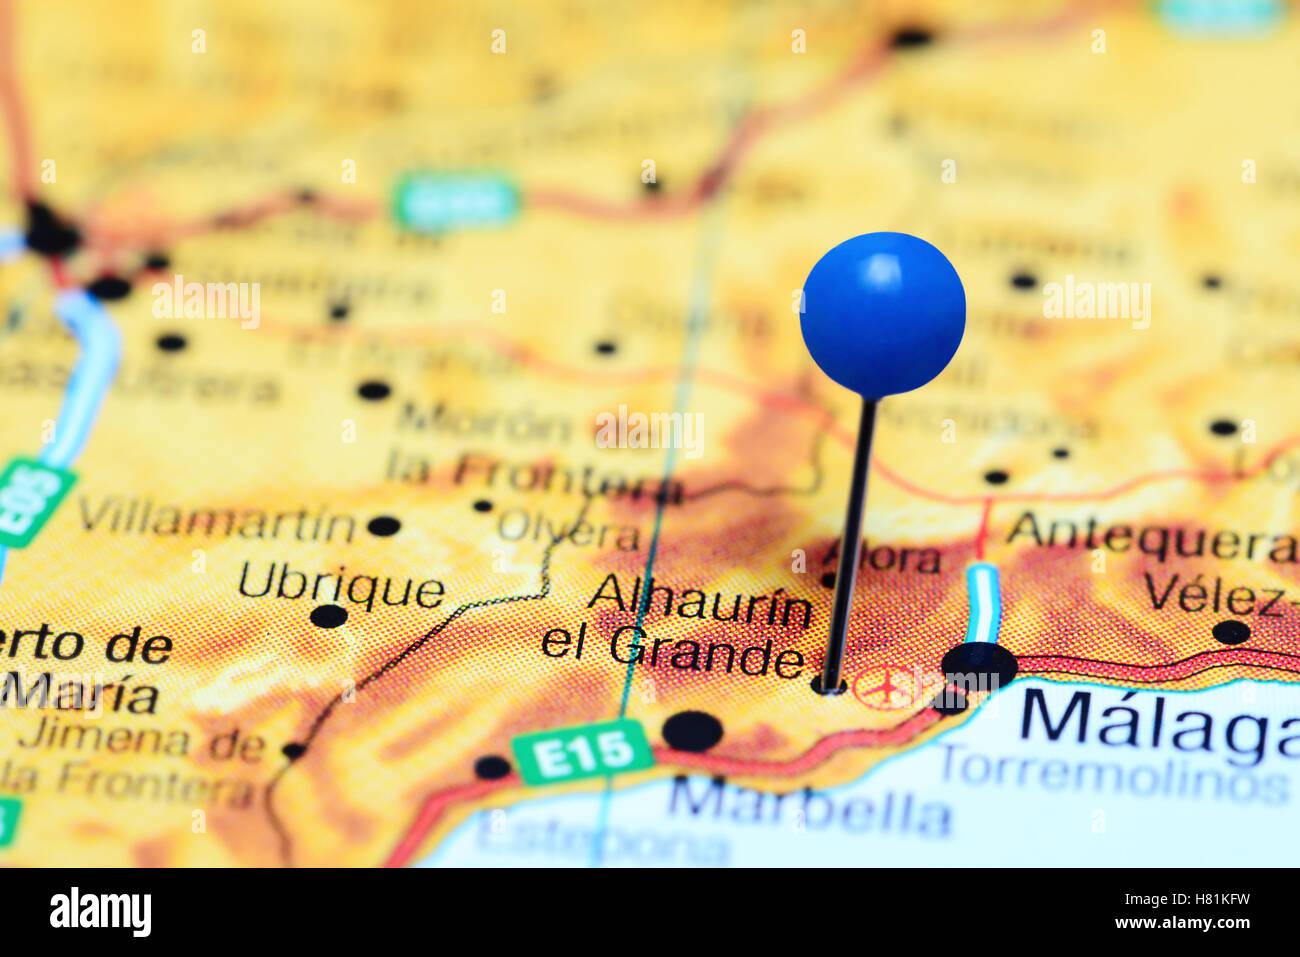 Alhaurin el Grande pinned on a map of Spain Stock Photo